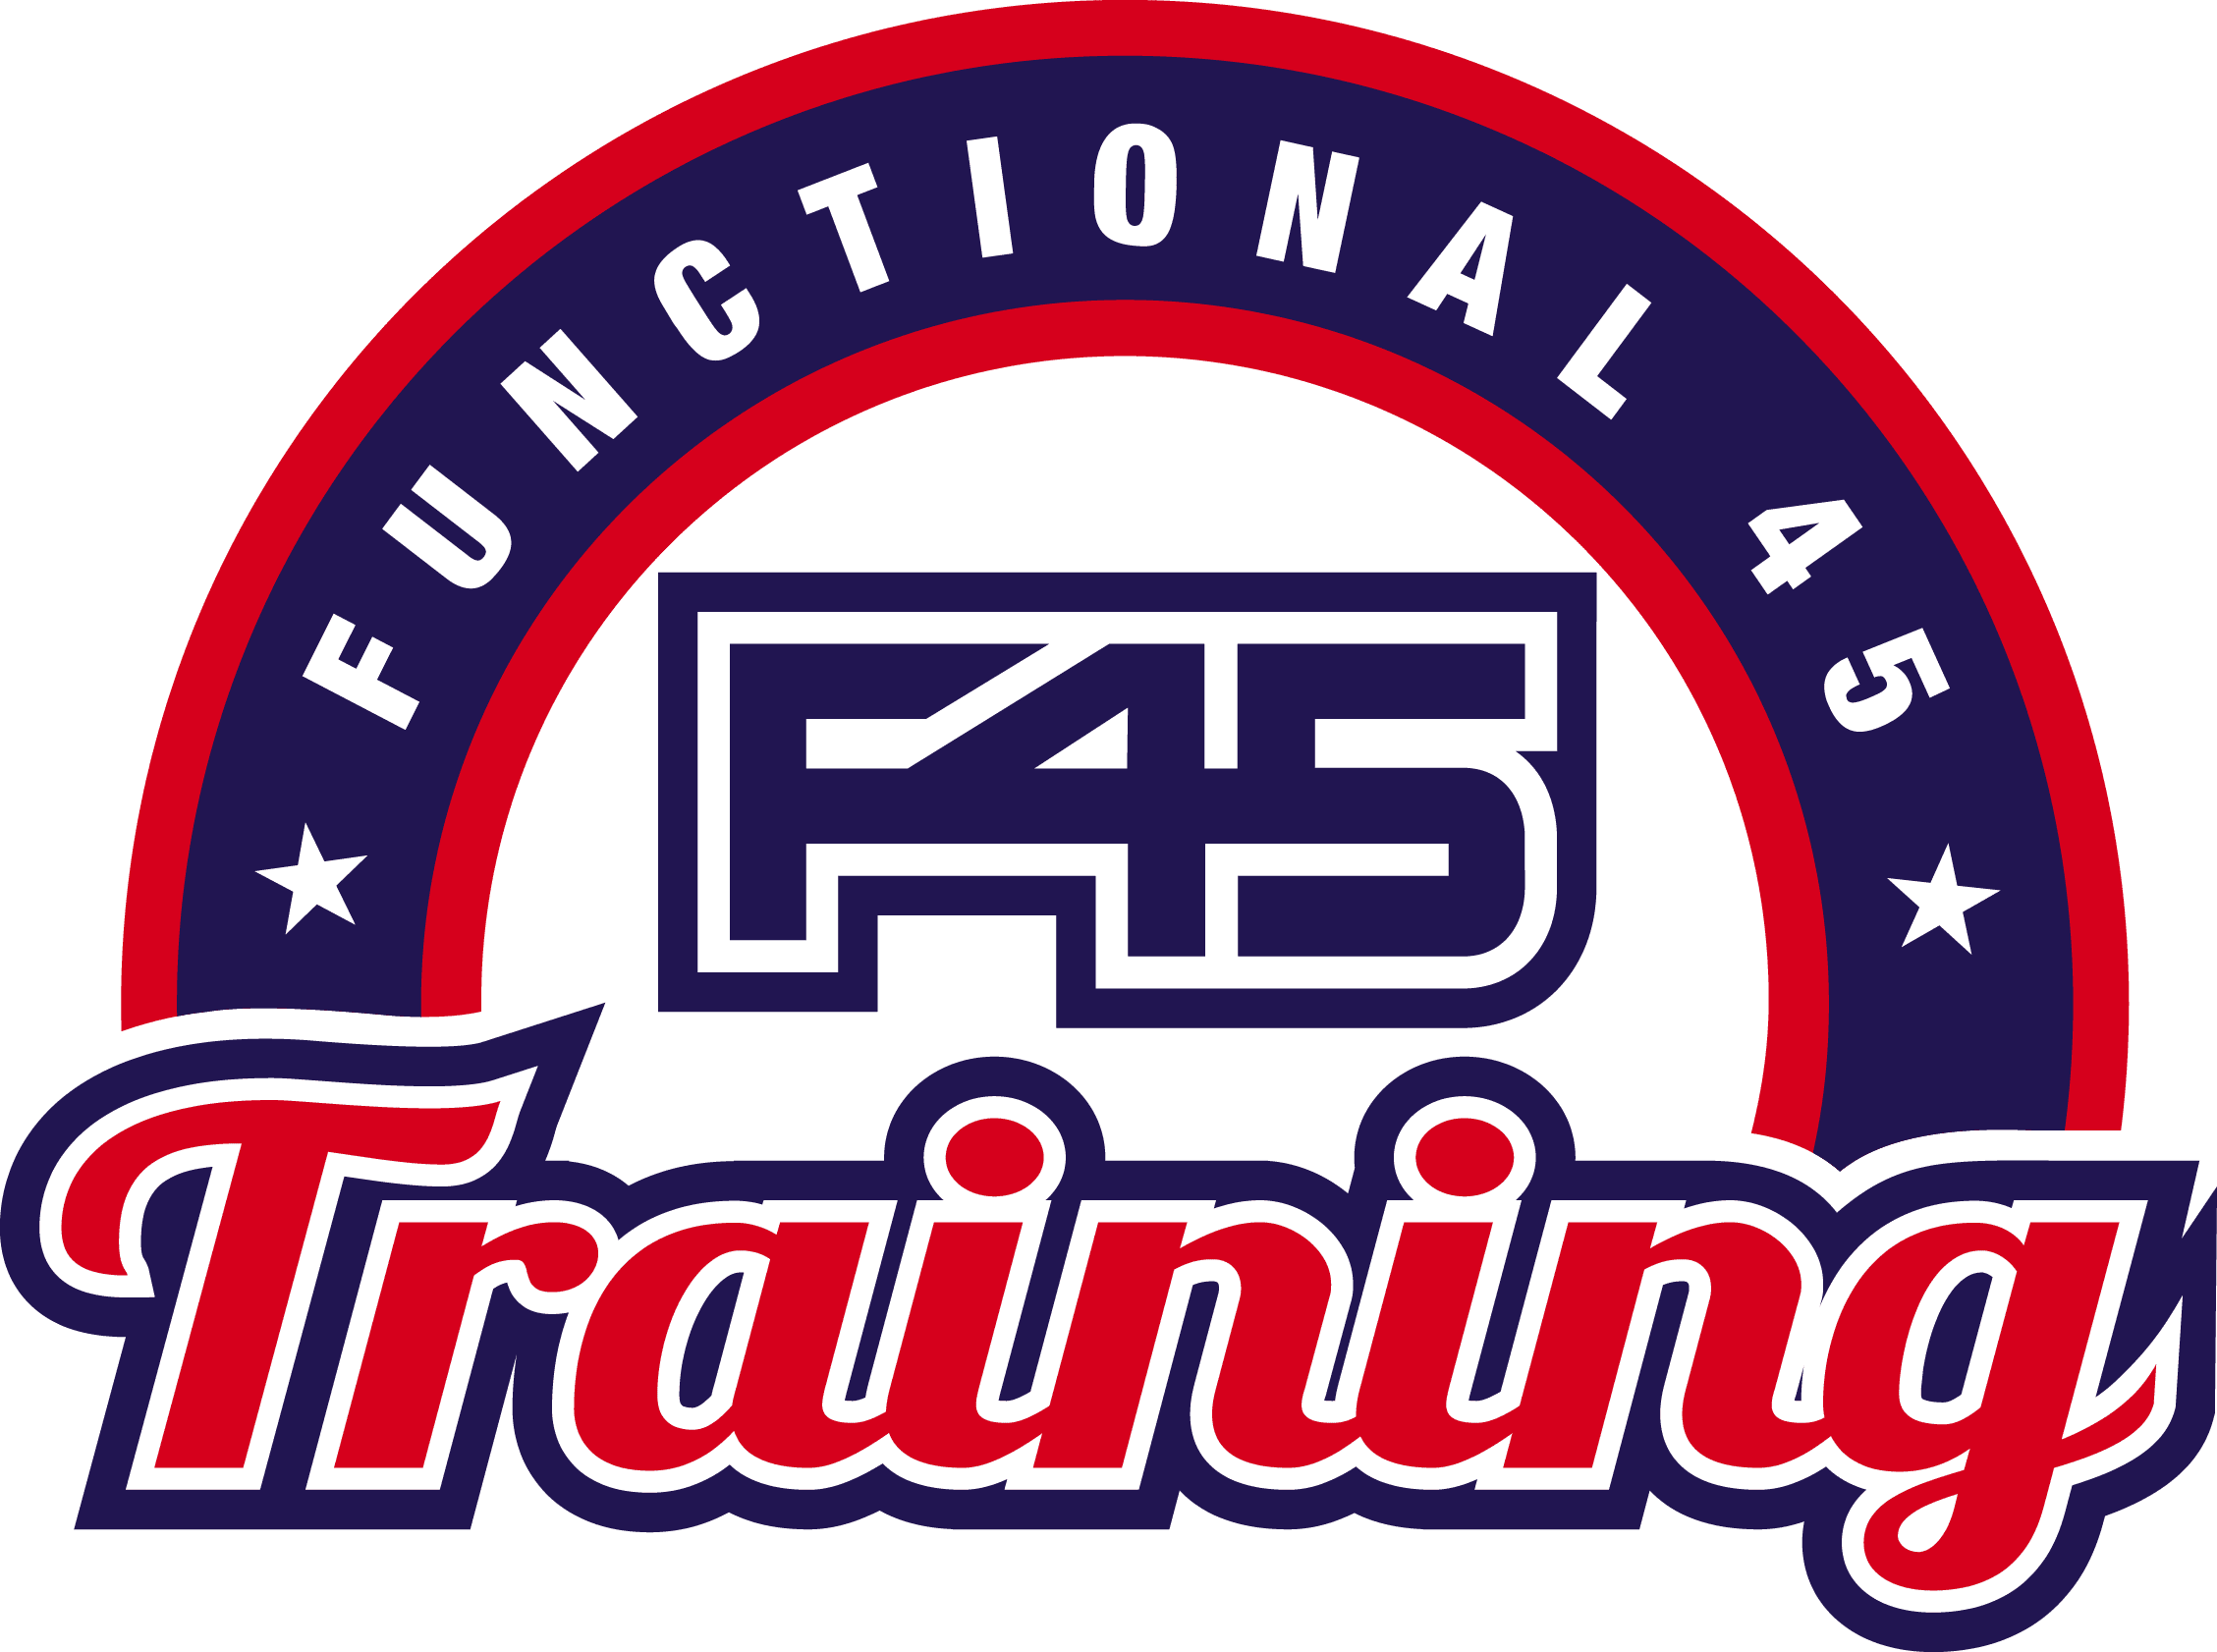 F45 Training headed to Midtown Tampa - Midtown Tampa